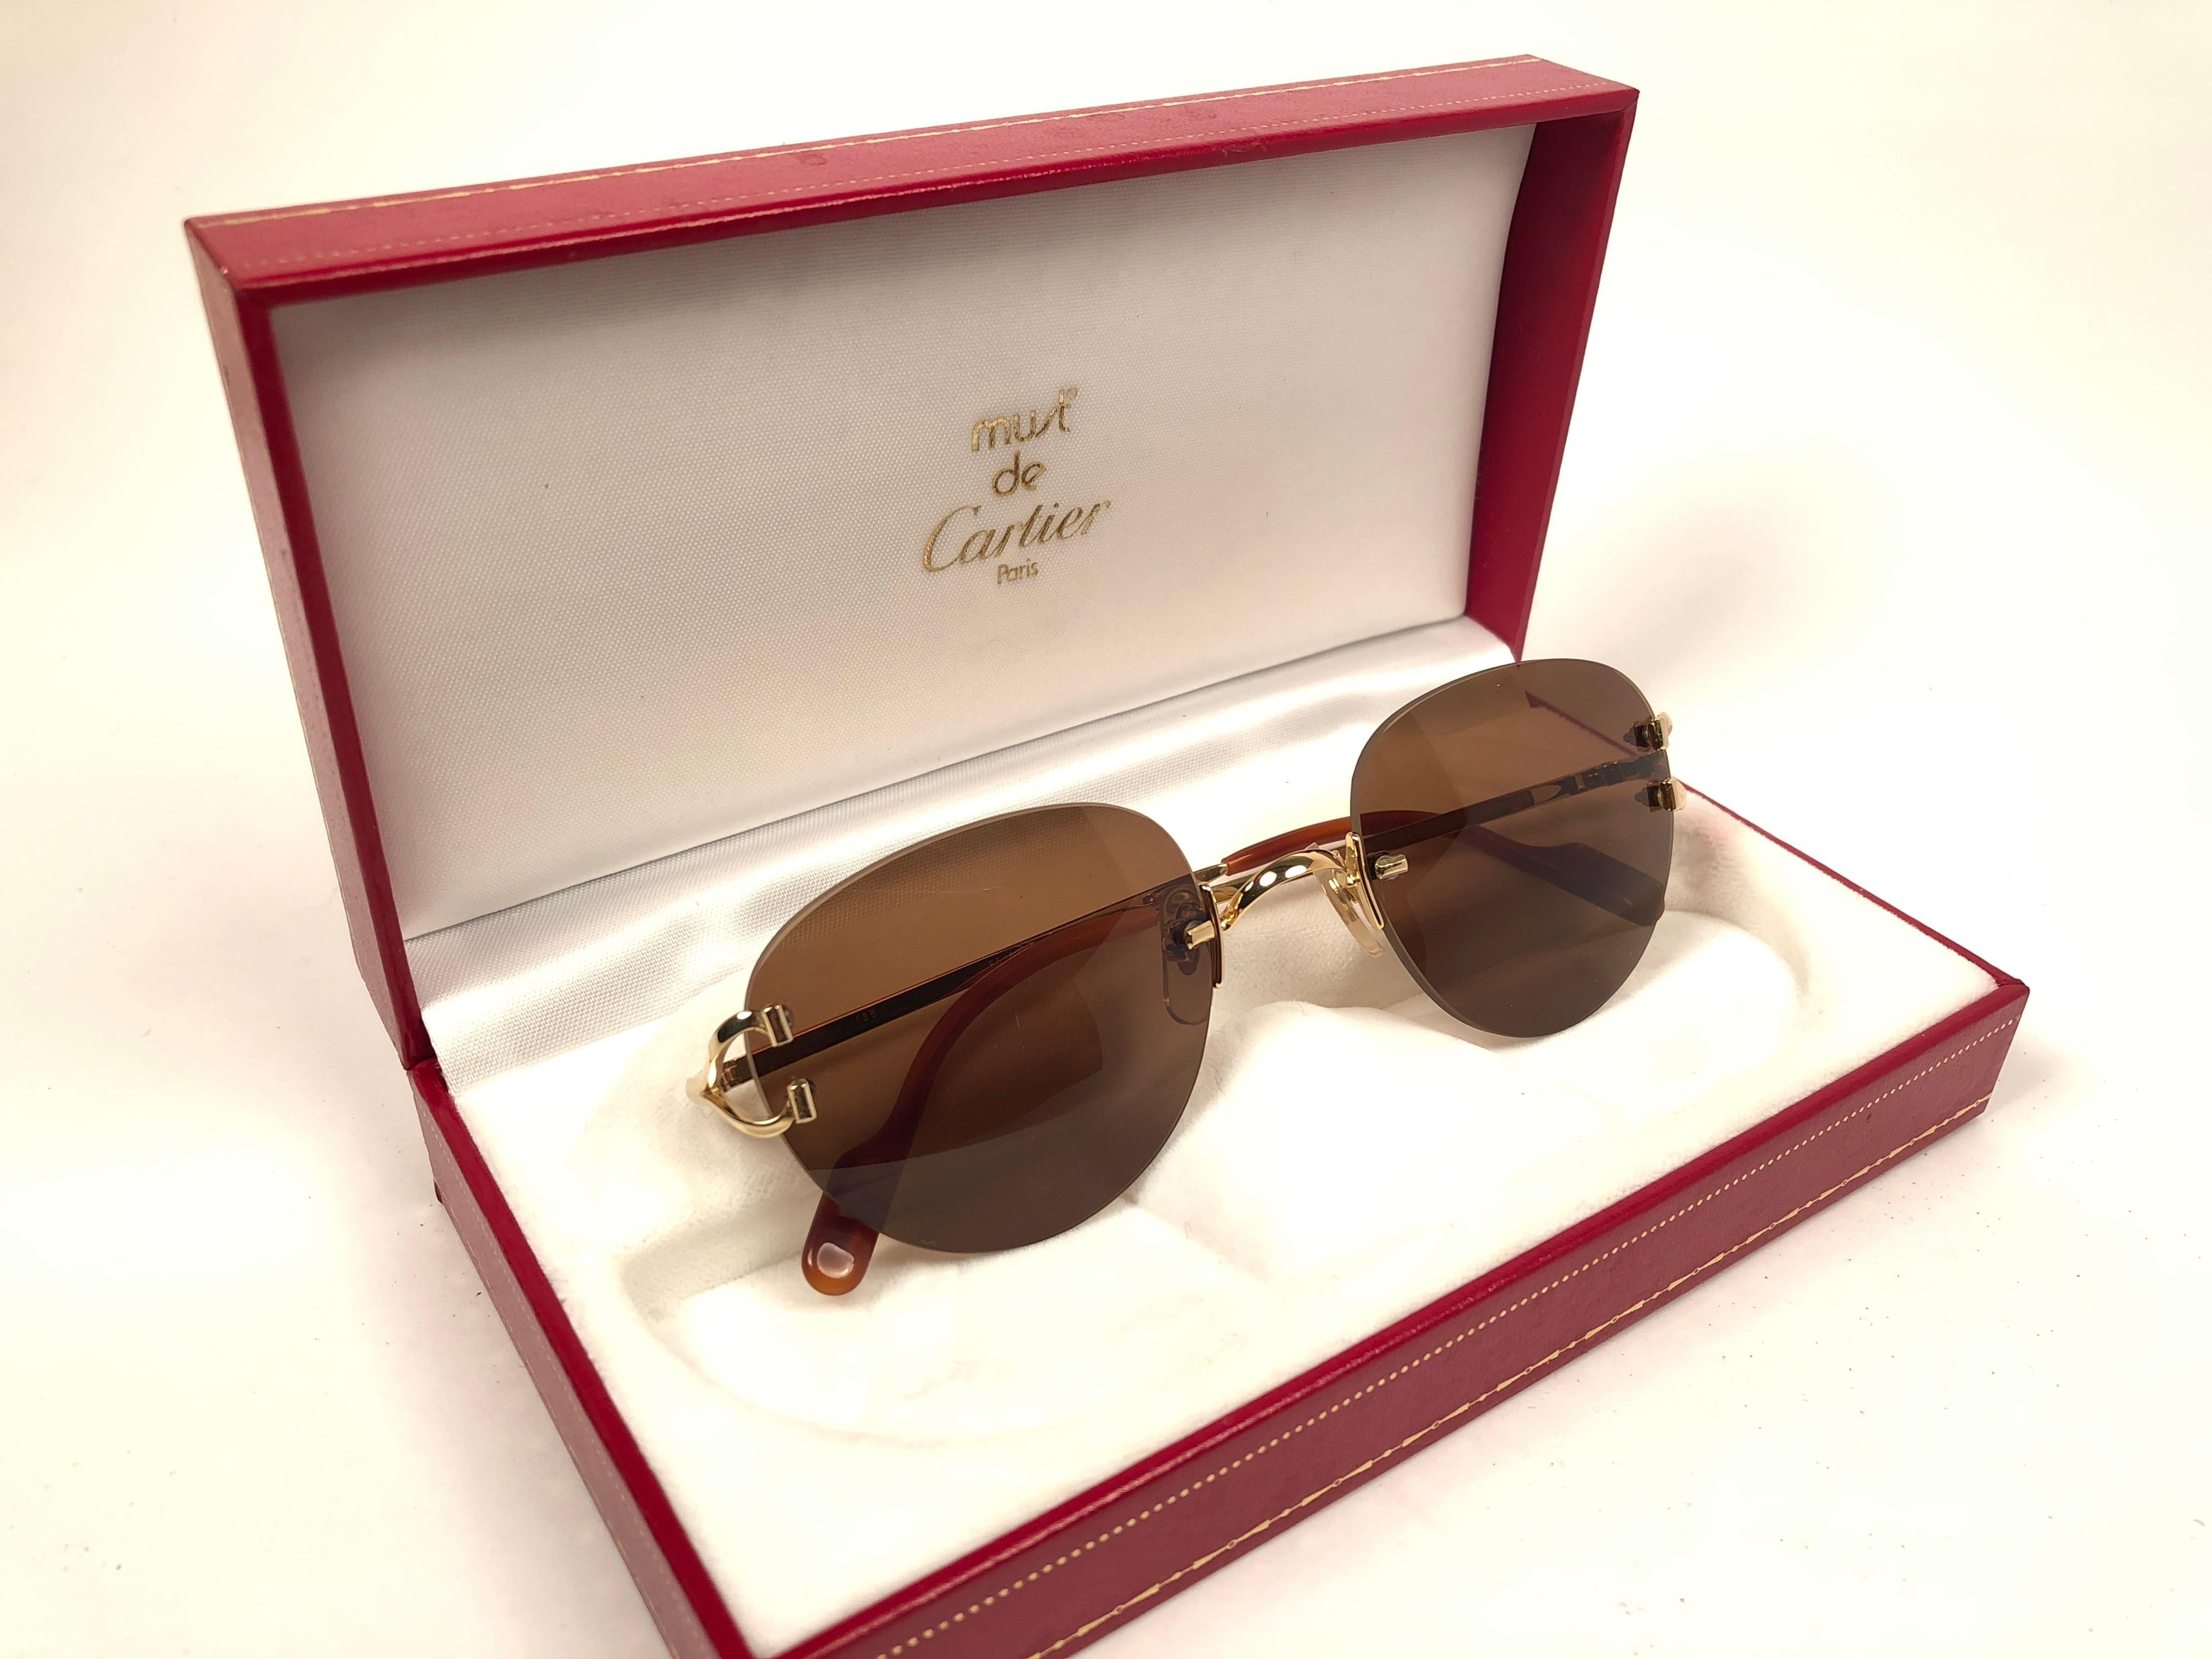 New Cartier Salisbury unique rimless sunglasses with solid brown (uv protection) lenses. Frame with the front and sides in gold. All hallmarks. Cartier gold signs on the ear paddles. These are like a pair of jewels on your nose. Beautiful design and